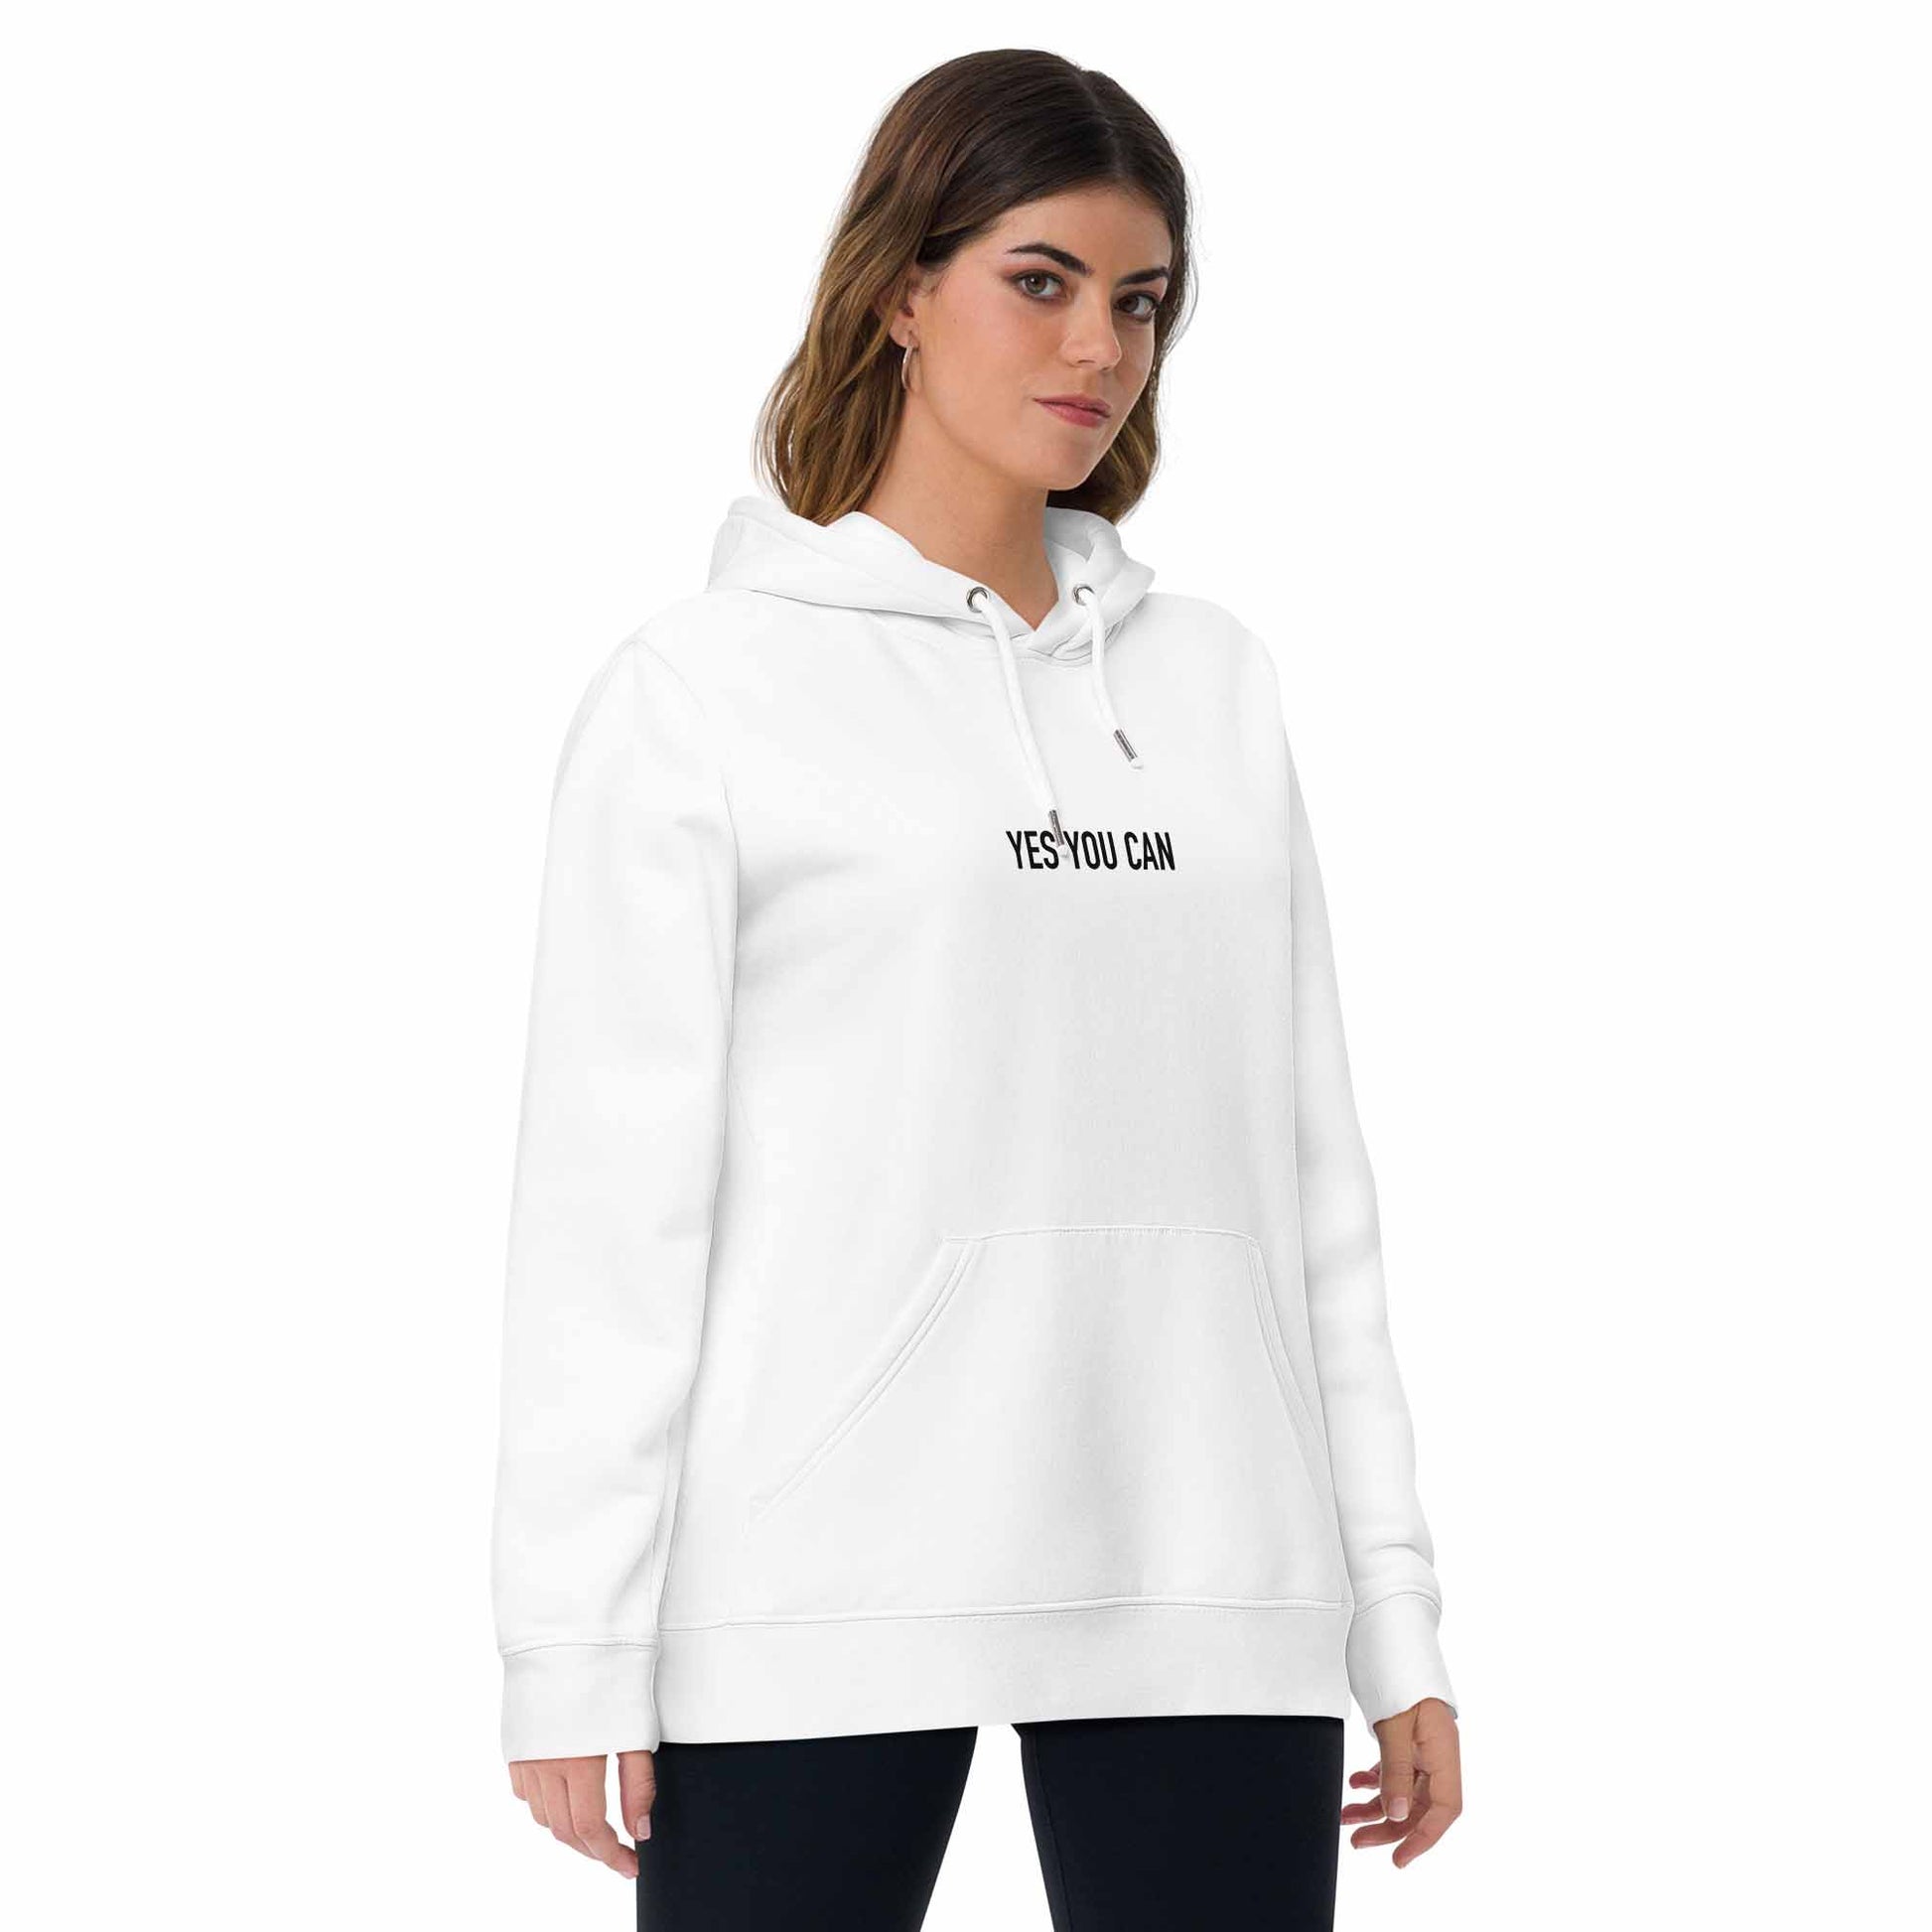 Women white inspirational hoodie with inspirational quote, "Yes You Can."